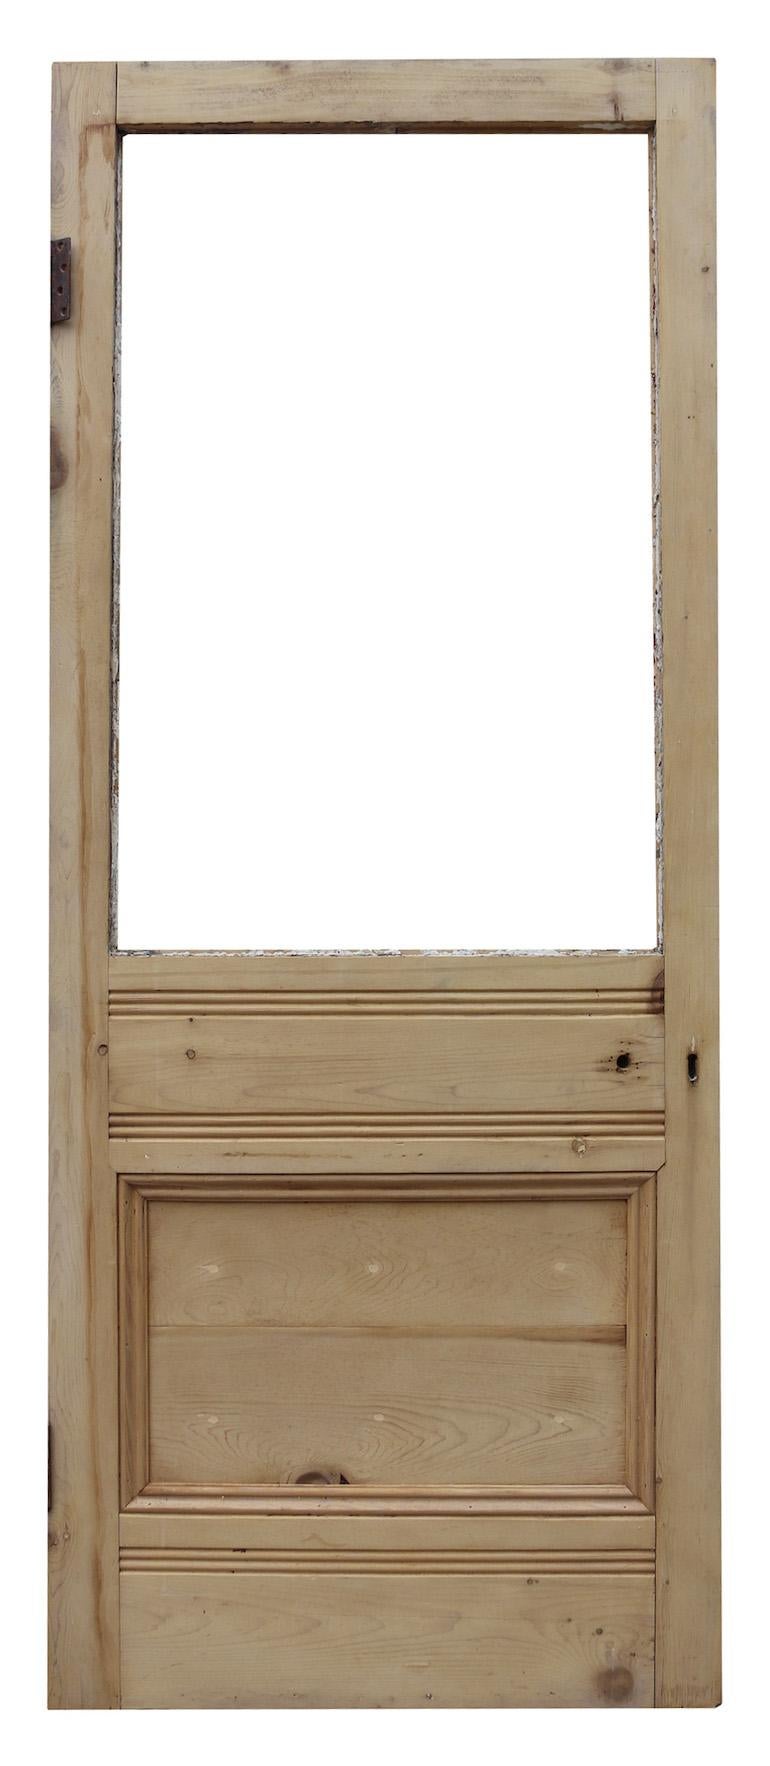 An English exterior door for glazing, with a stripped and sanded finish.